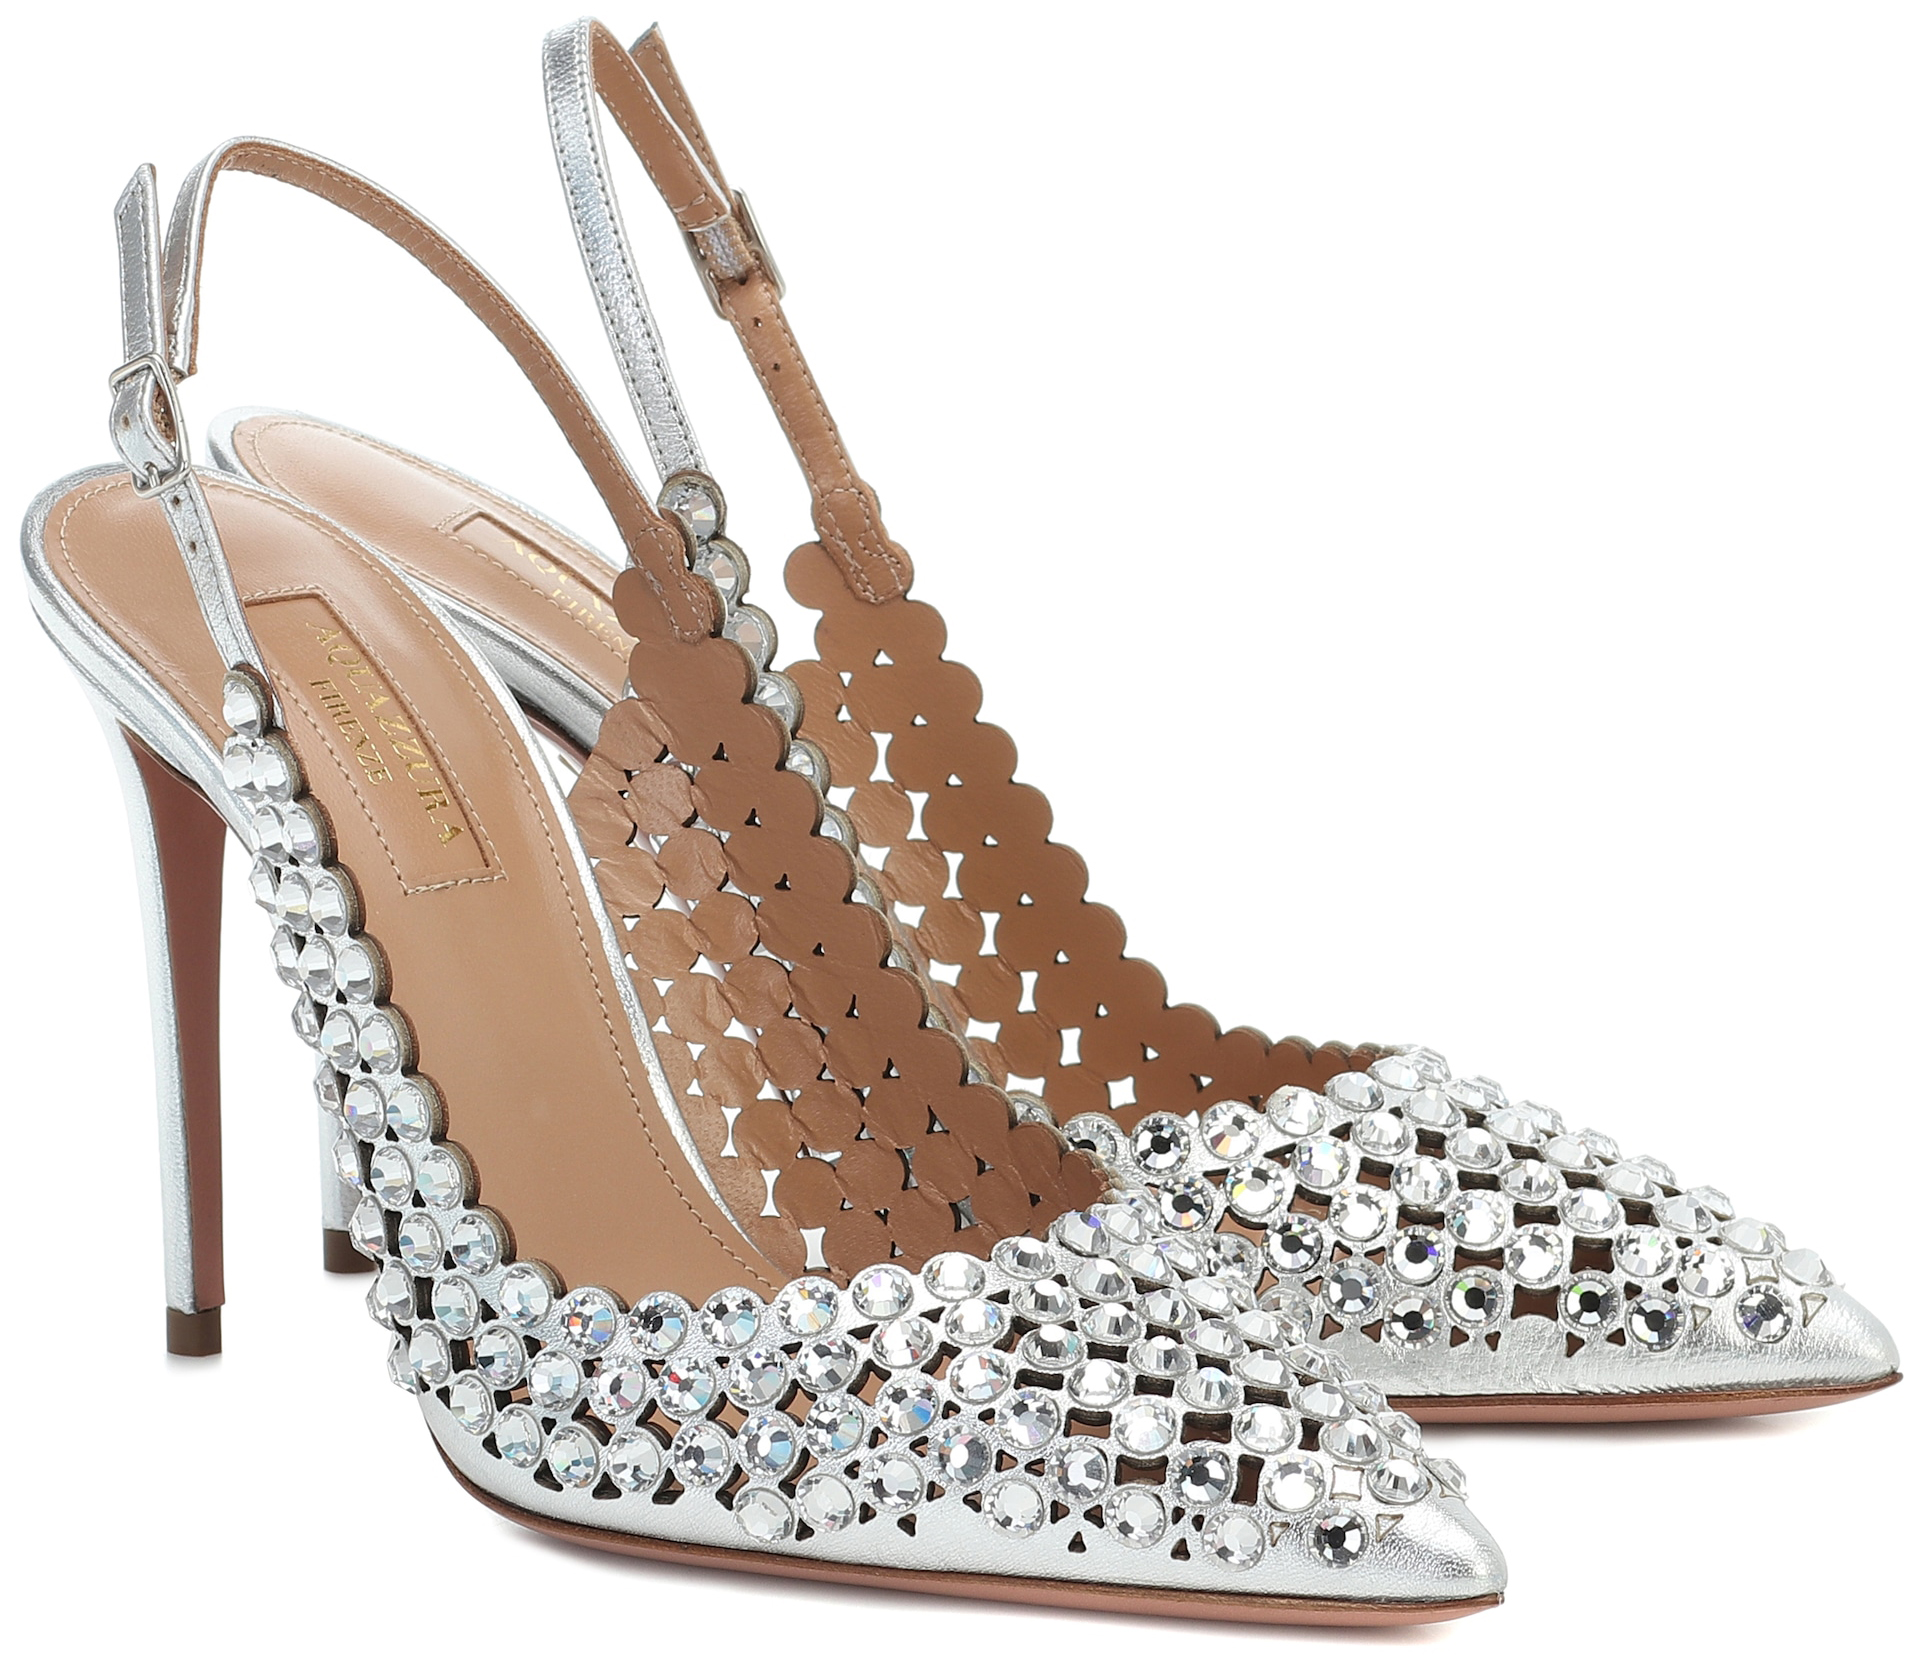 The Aquazzura Tequila pumps are made from silver lamb leather and feature light-catching crystals all over